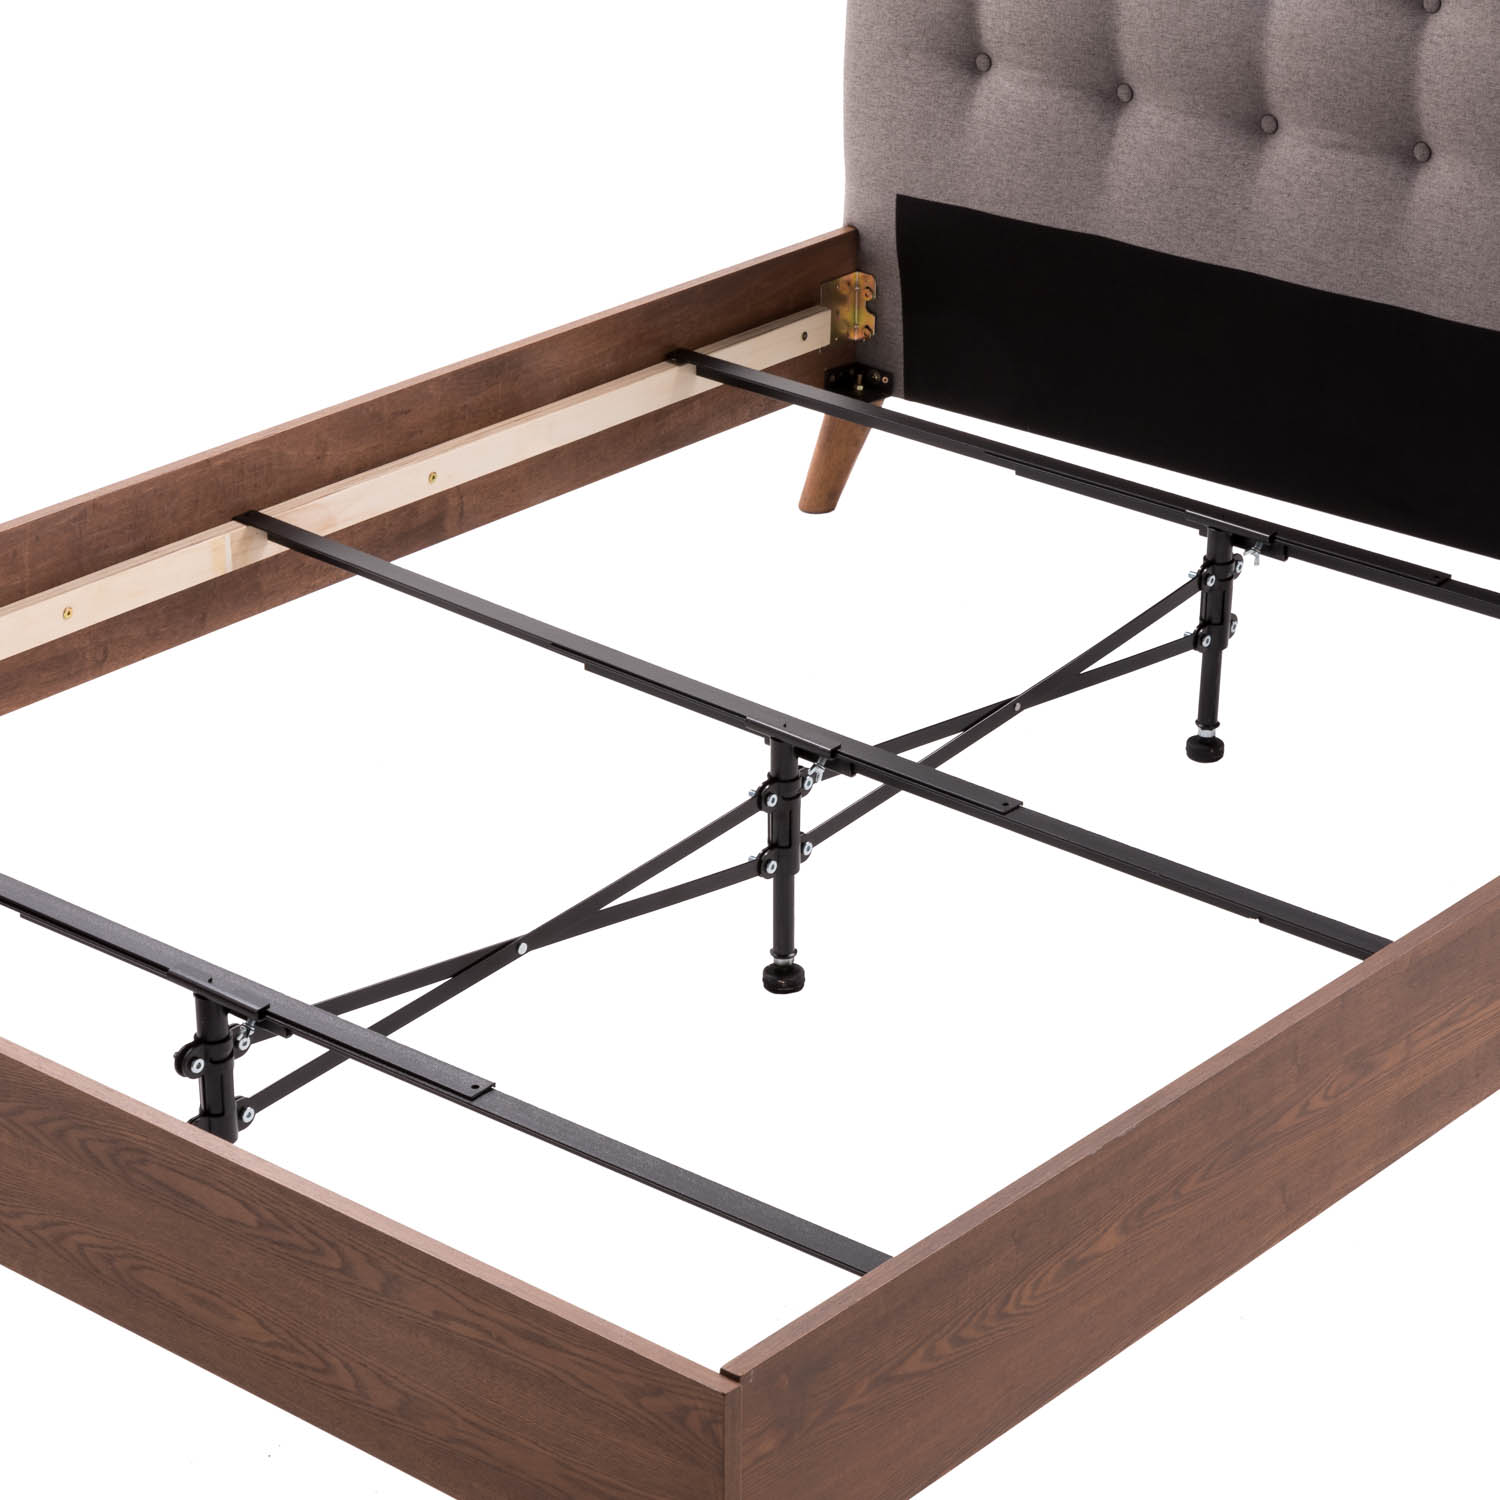 Structures Adjustable Center Support, Metal Full Size Bed Frame With Center Support